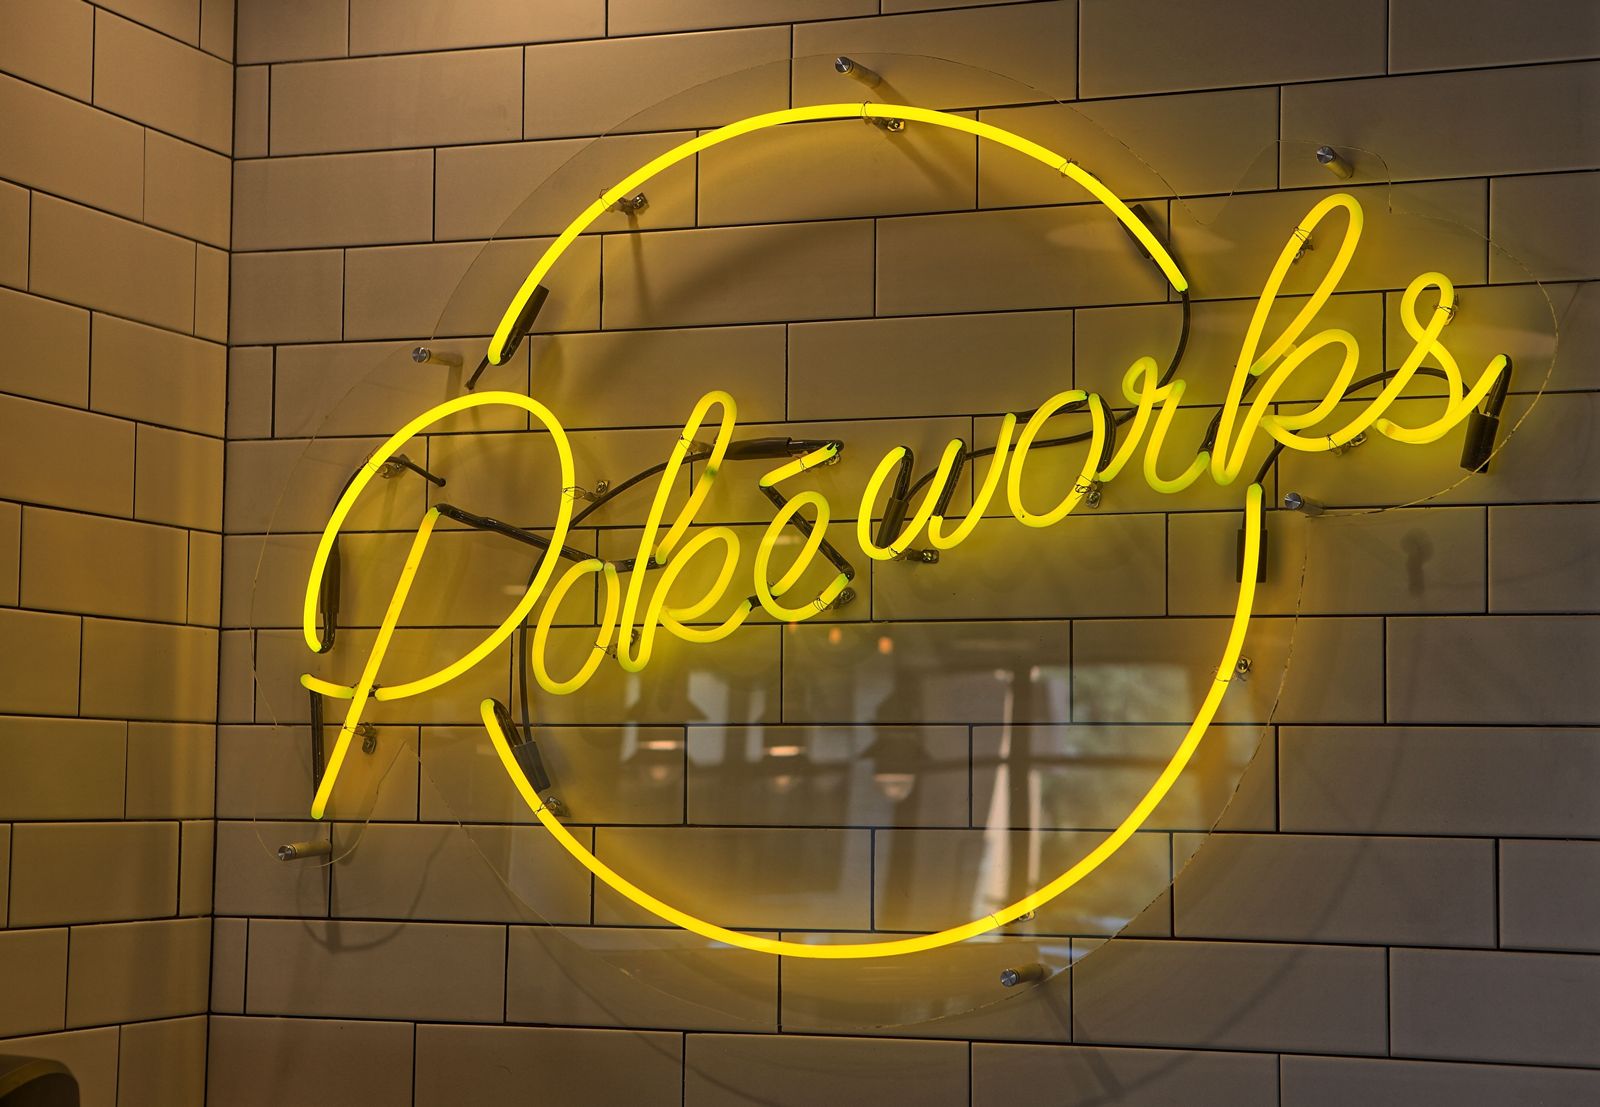 Pokeworks Charges Back into NYC, Completes Home Market Reopenings